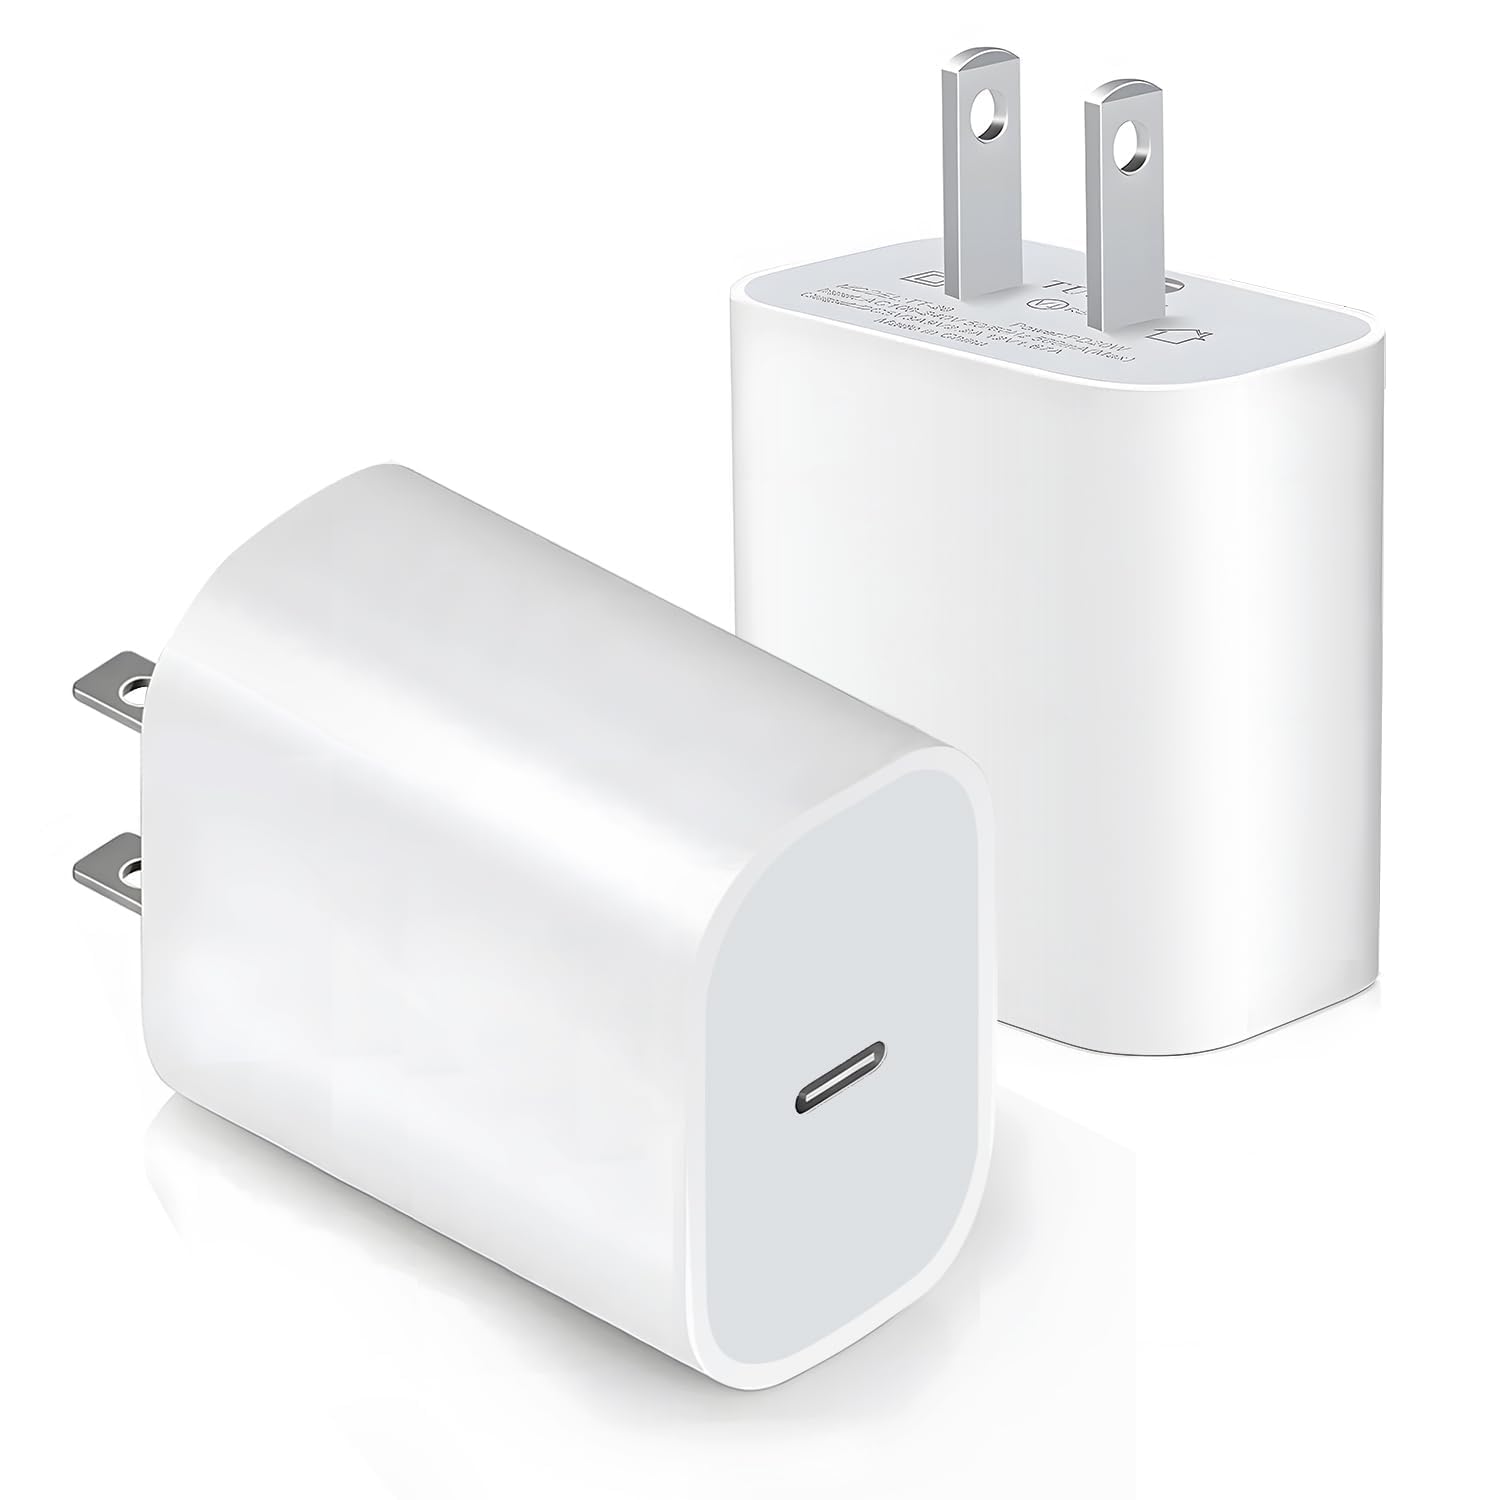 iPhone 20W USB-C Charger Block with PD Fast Charging Capability, Type C Wall Charger Compatible with iPhone 15 Pro Max/14/13/iPad [2 Pack]